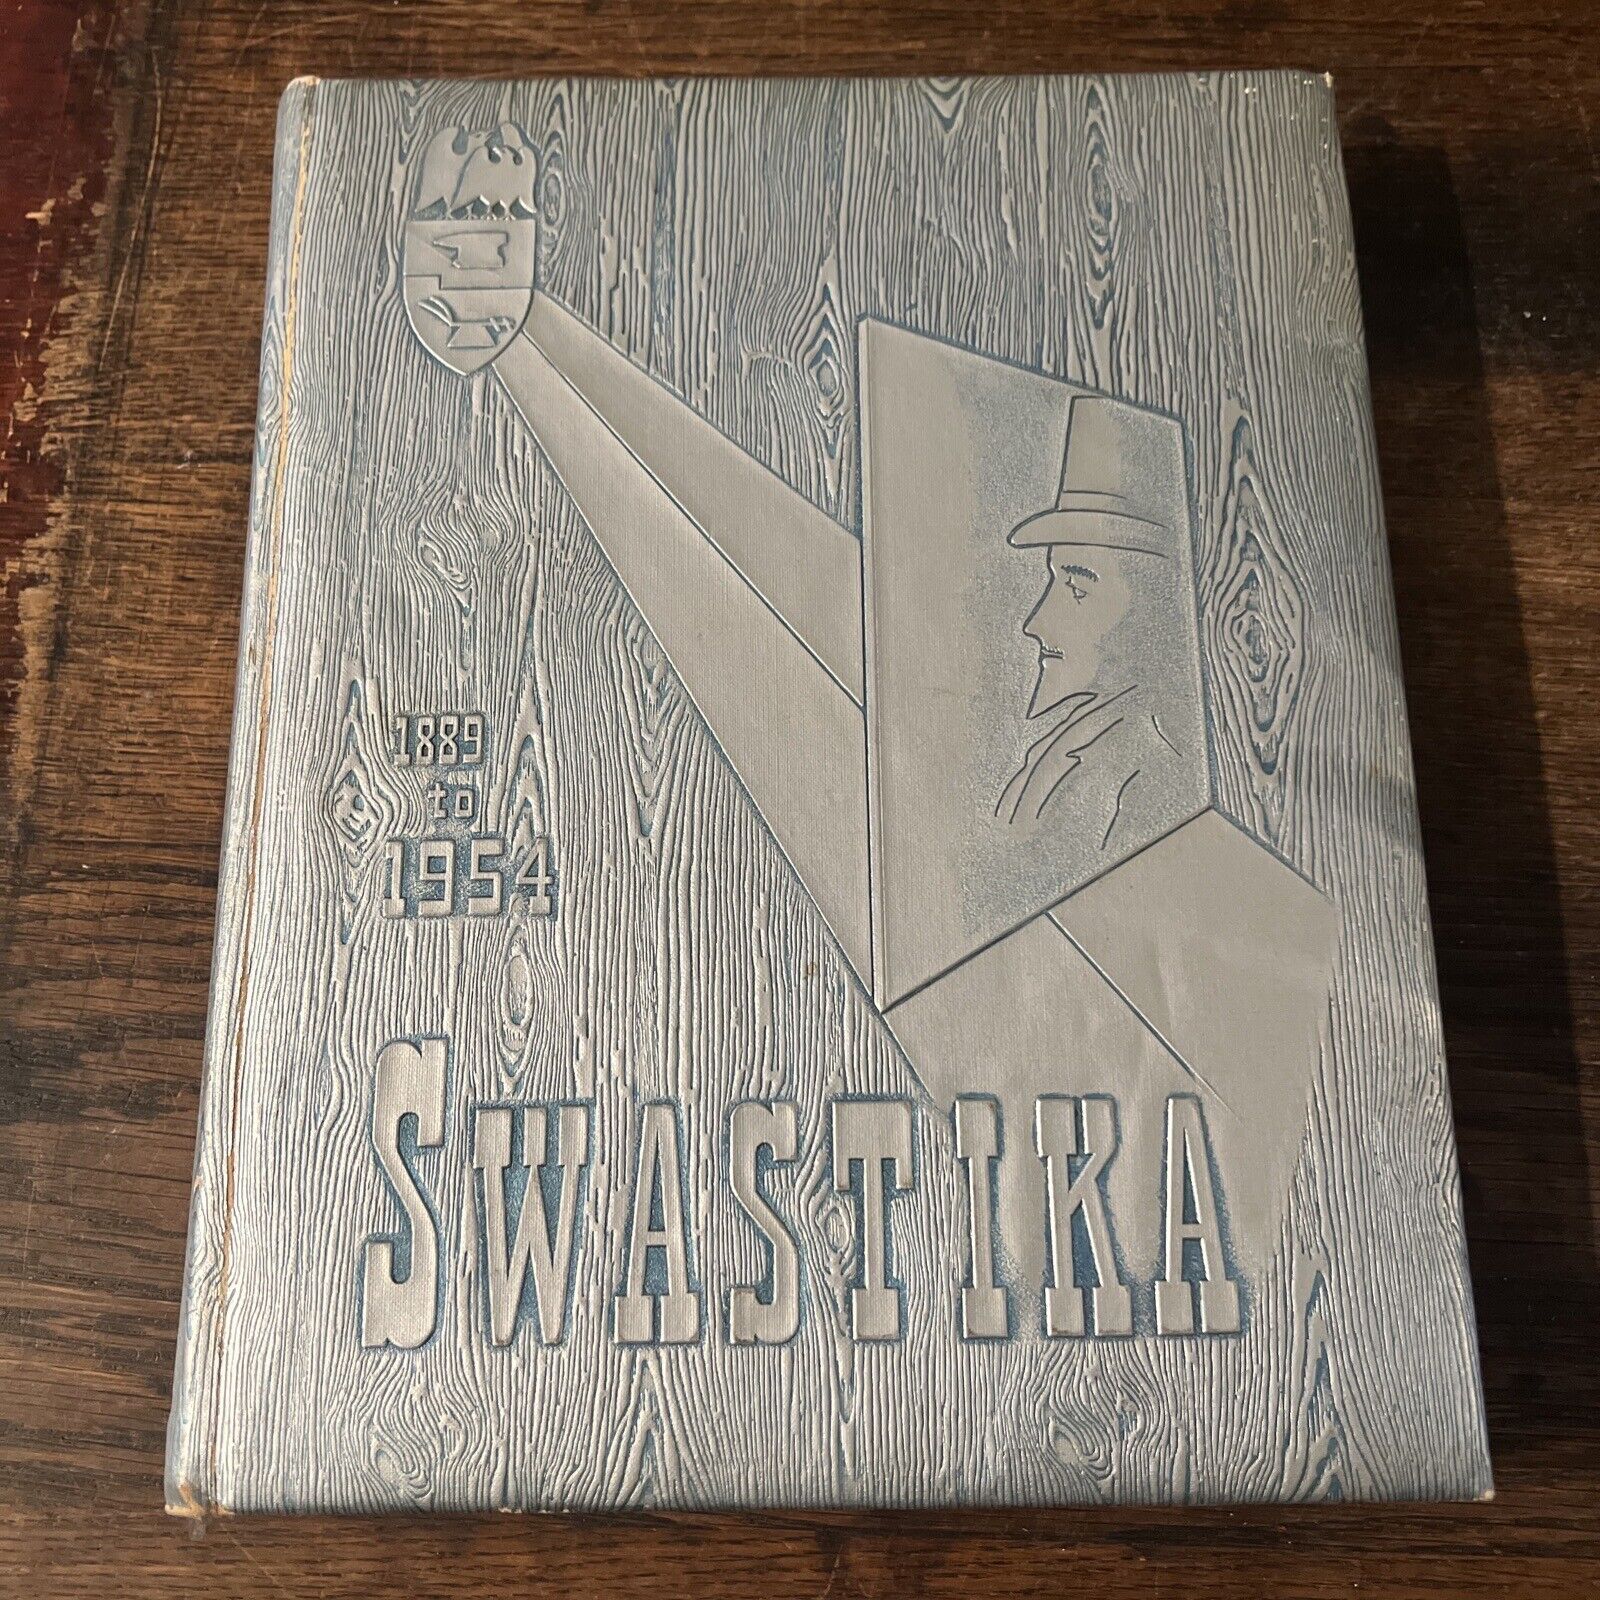 NEW MEXICO A&M 1954 STATE COLLEGE YEARBOOK -THE SWASTIKA